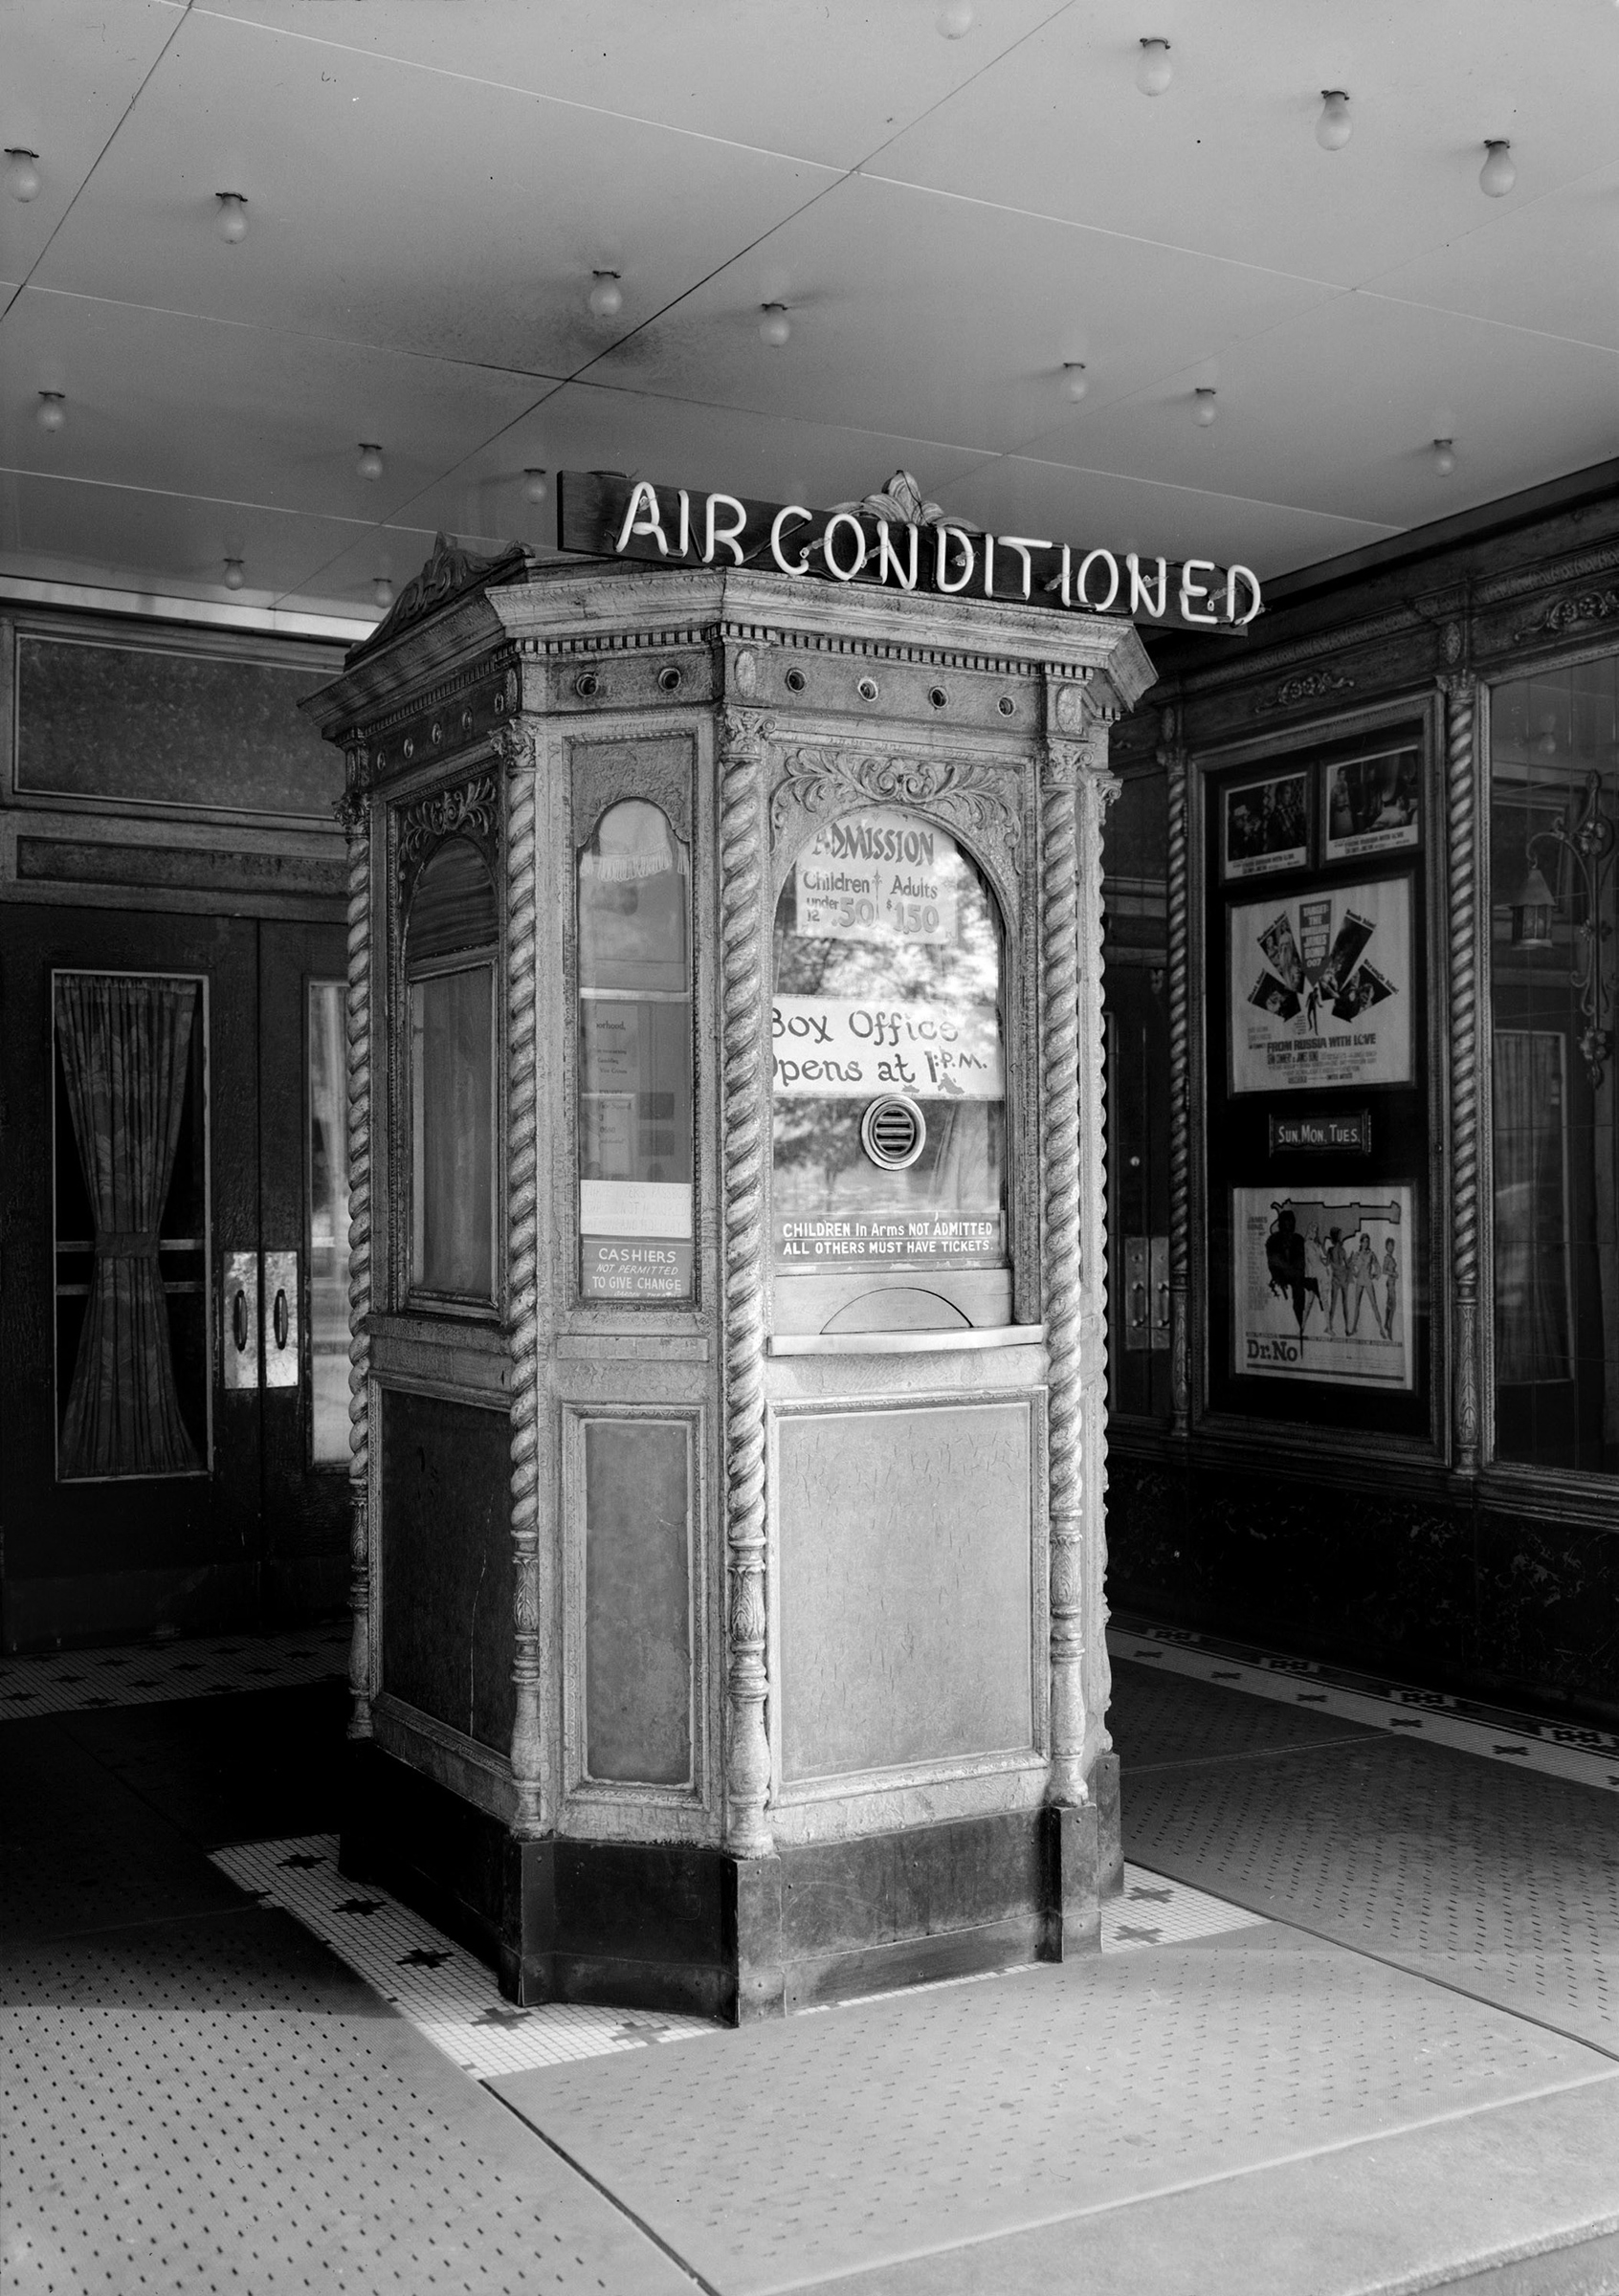 A theater's lobby advertises air conditioning to prospective movie-goers. (LMPC/Getty Images)